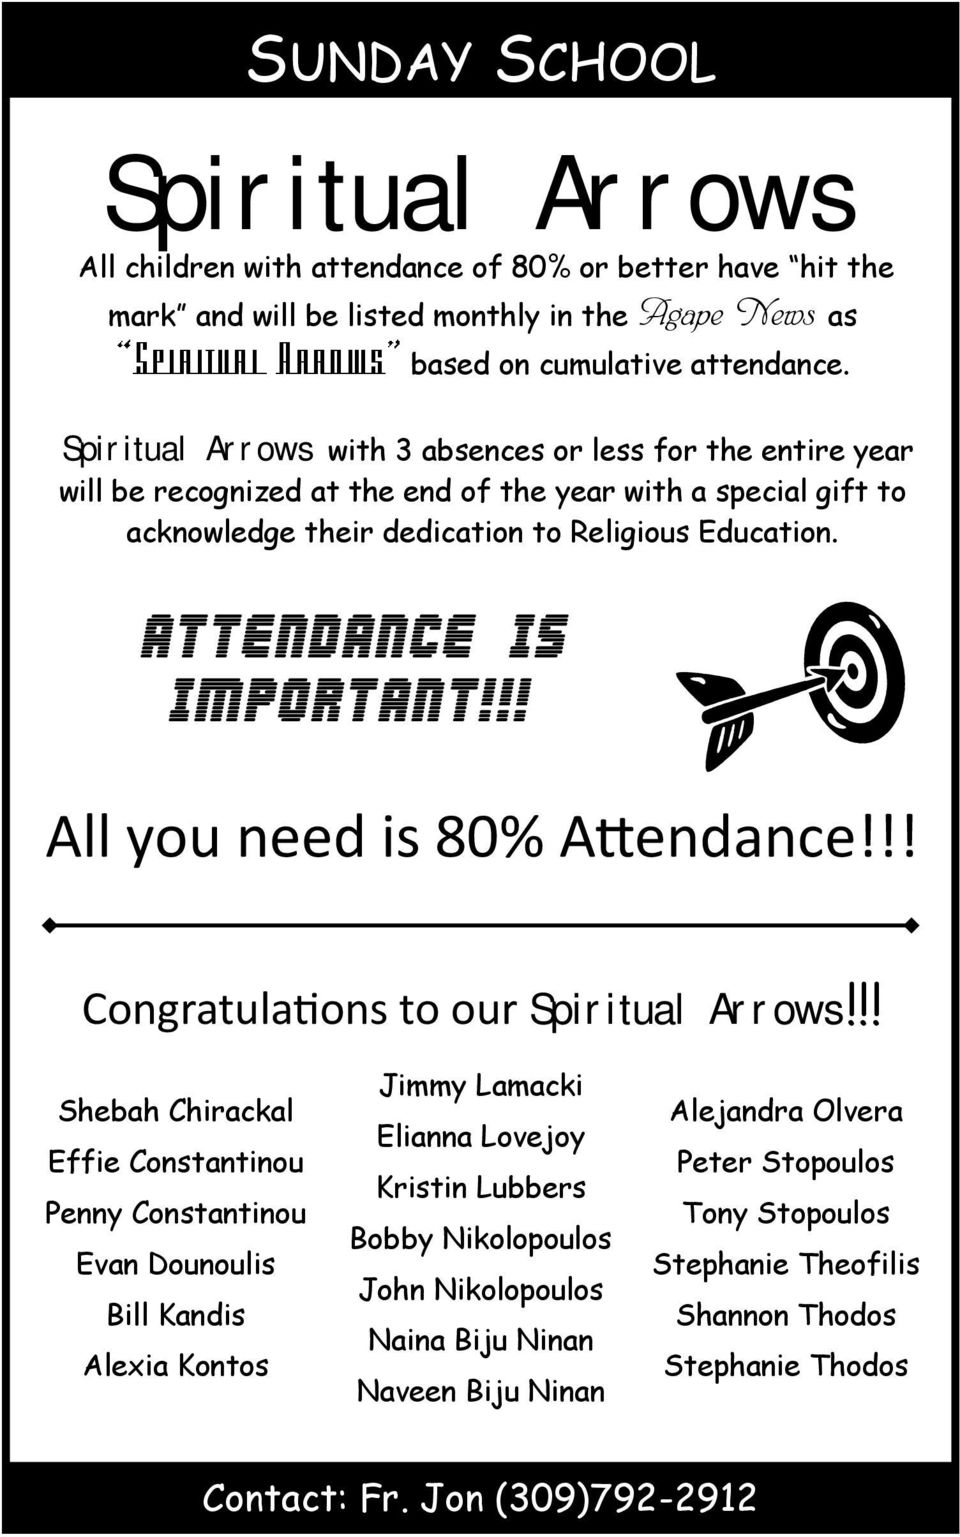 Attendance is Important!!! All you need is 80% Attendance!!! Congratulations to our Spiritual Arrows!